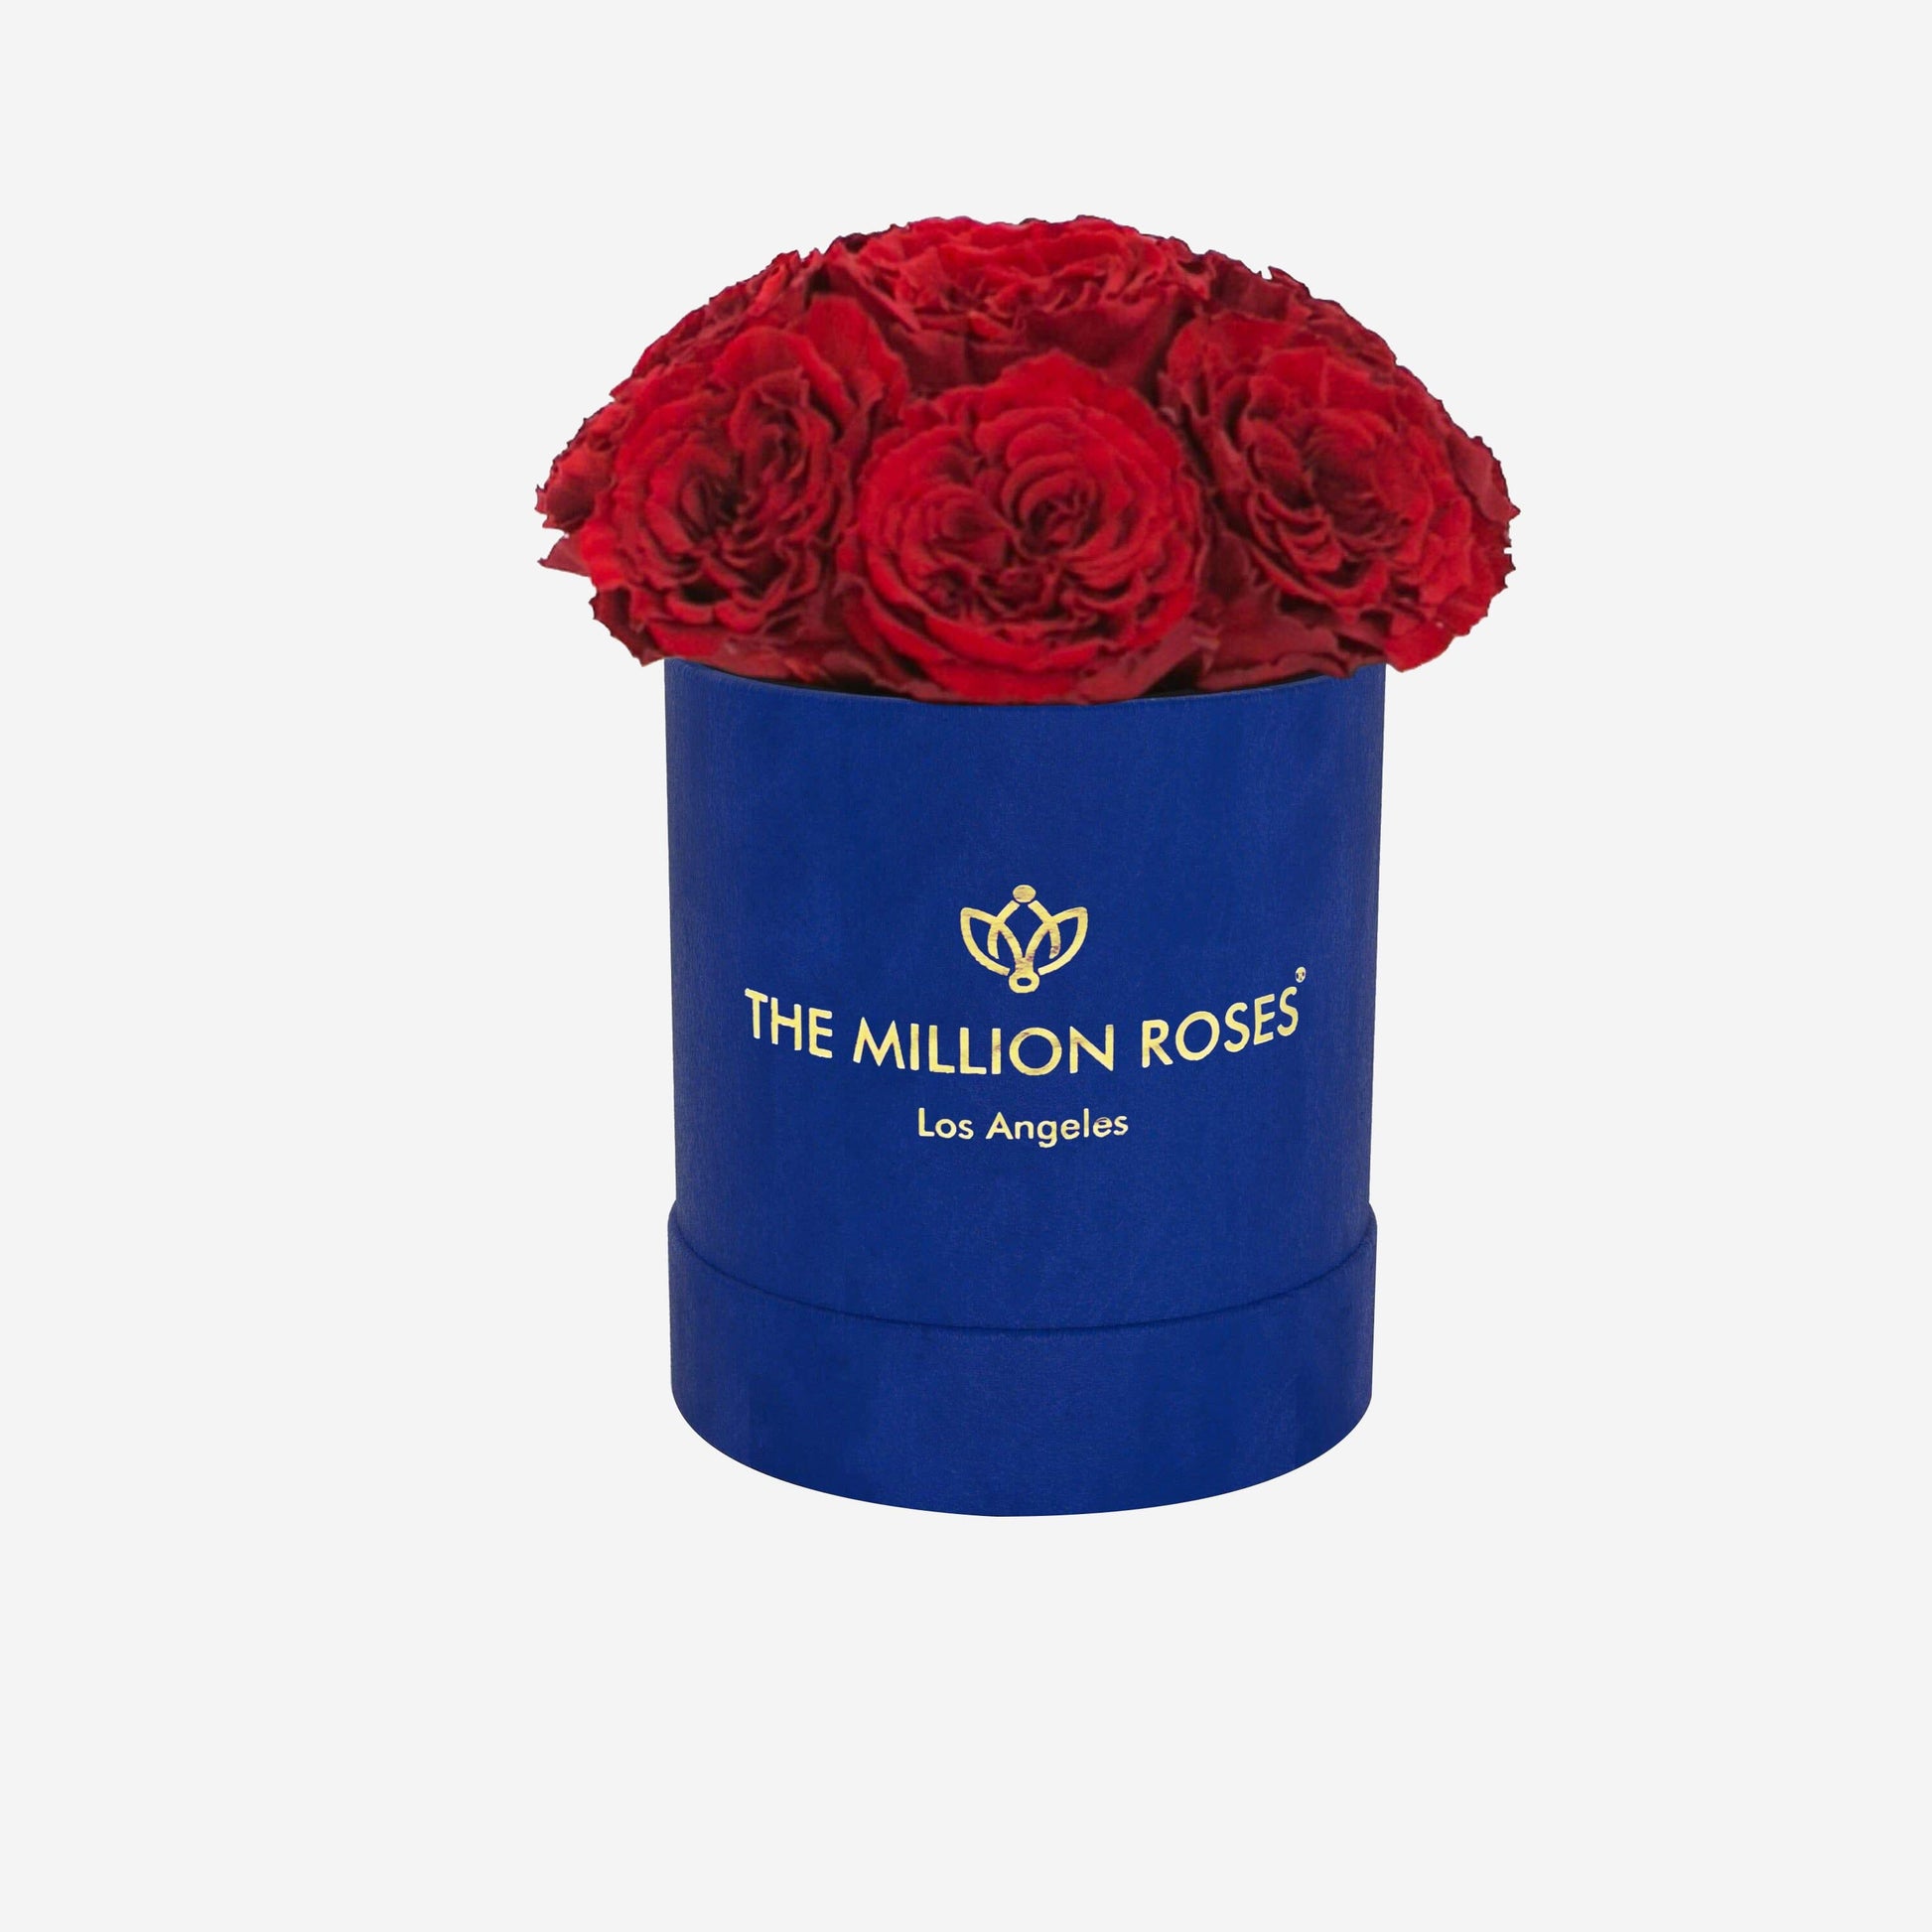 Basic Royal Blue Suede Dome Box | Red Carmen Roses - The Million Roses